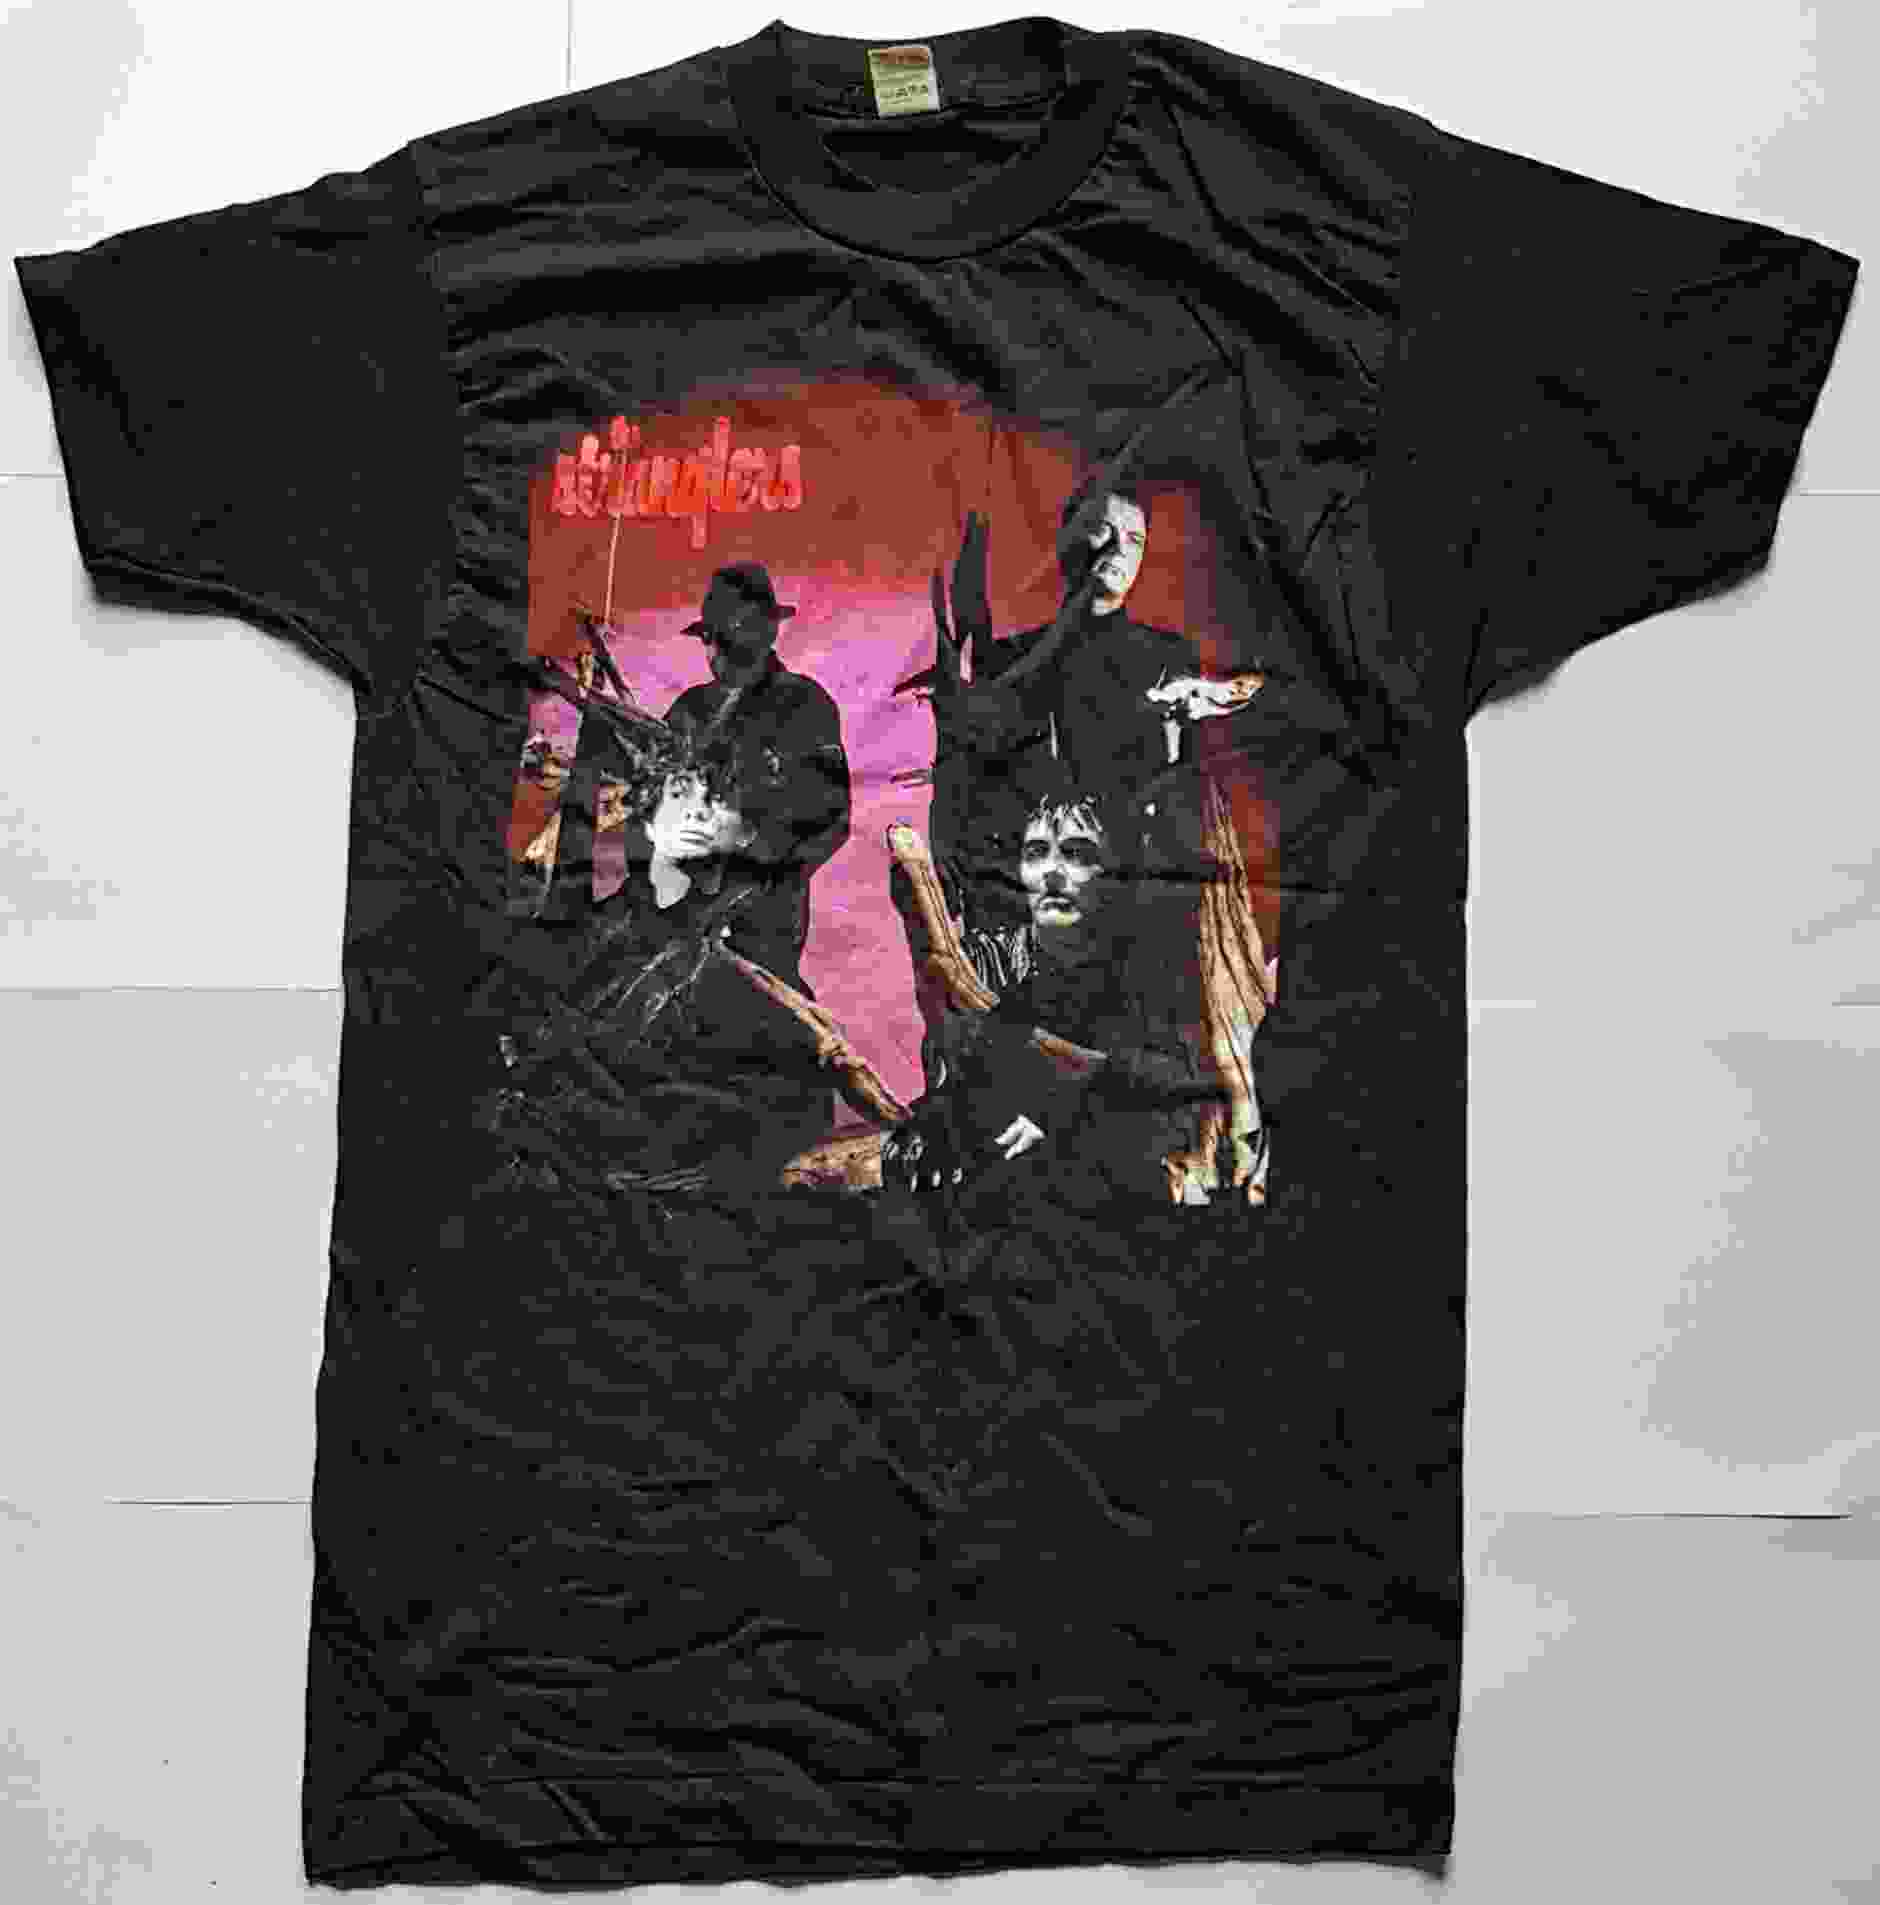 Picture of Band by artist The Stranglers from The Stranglers clothes